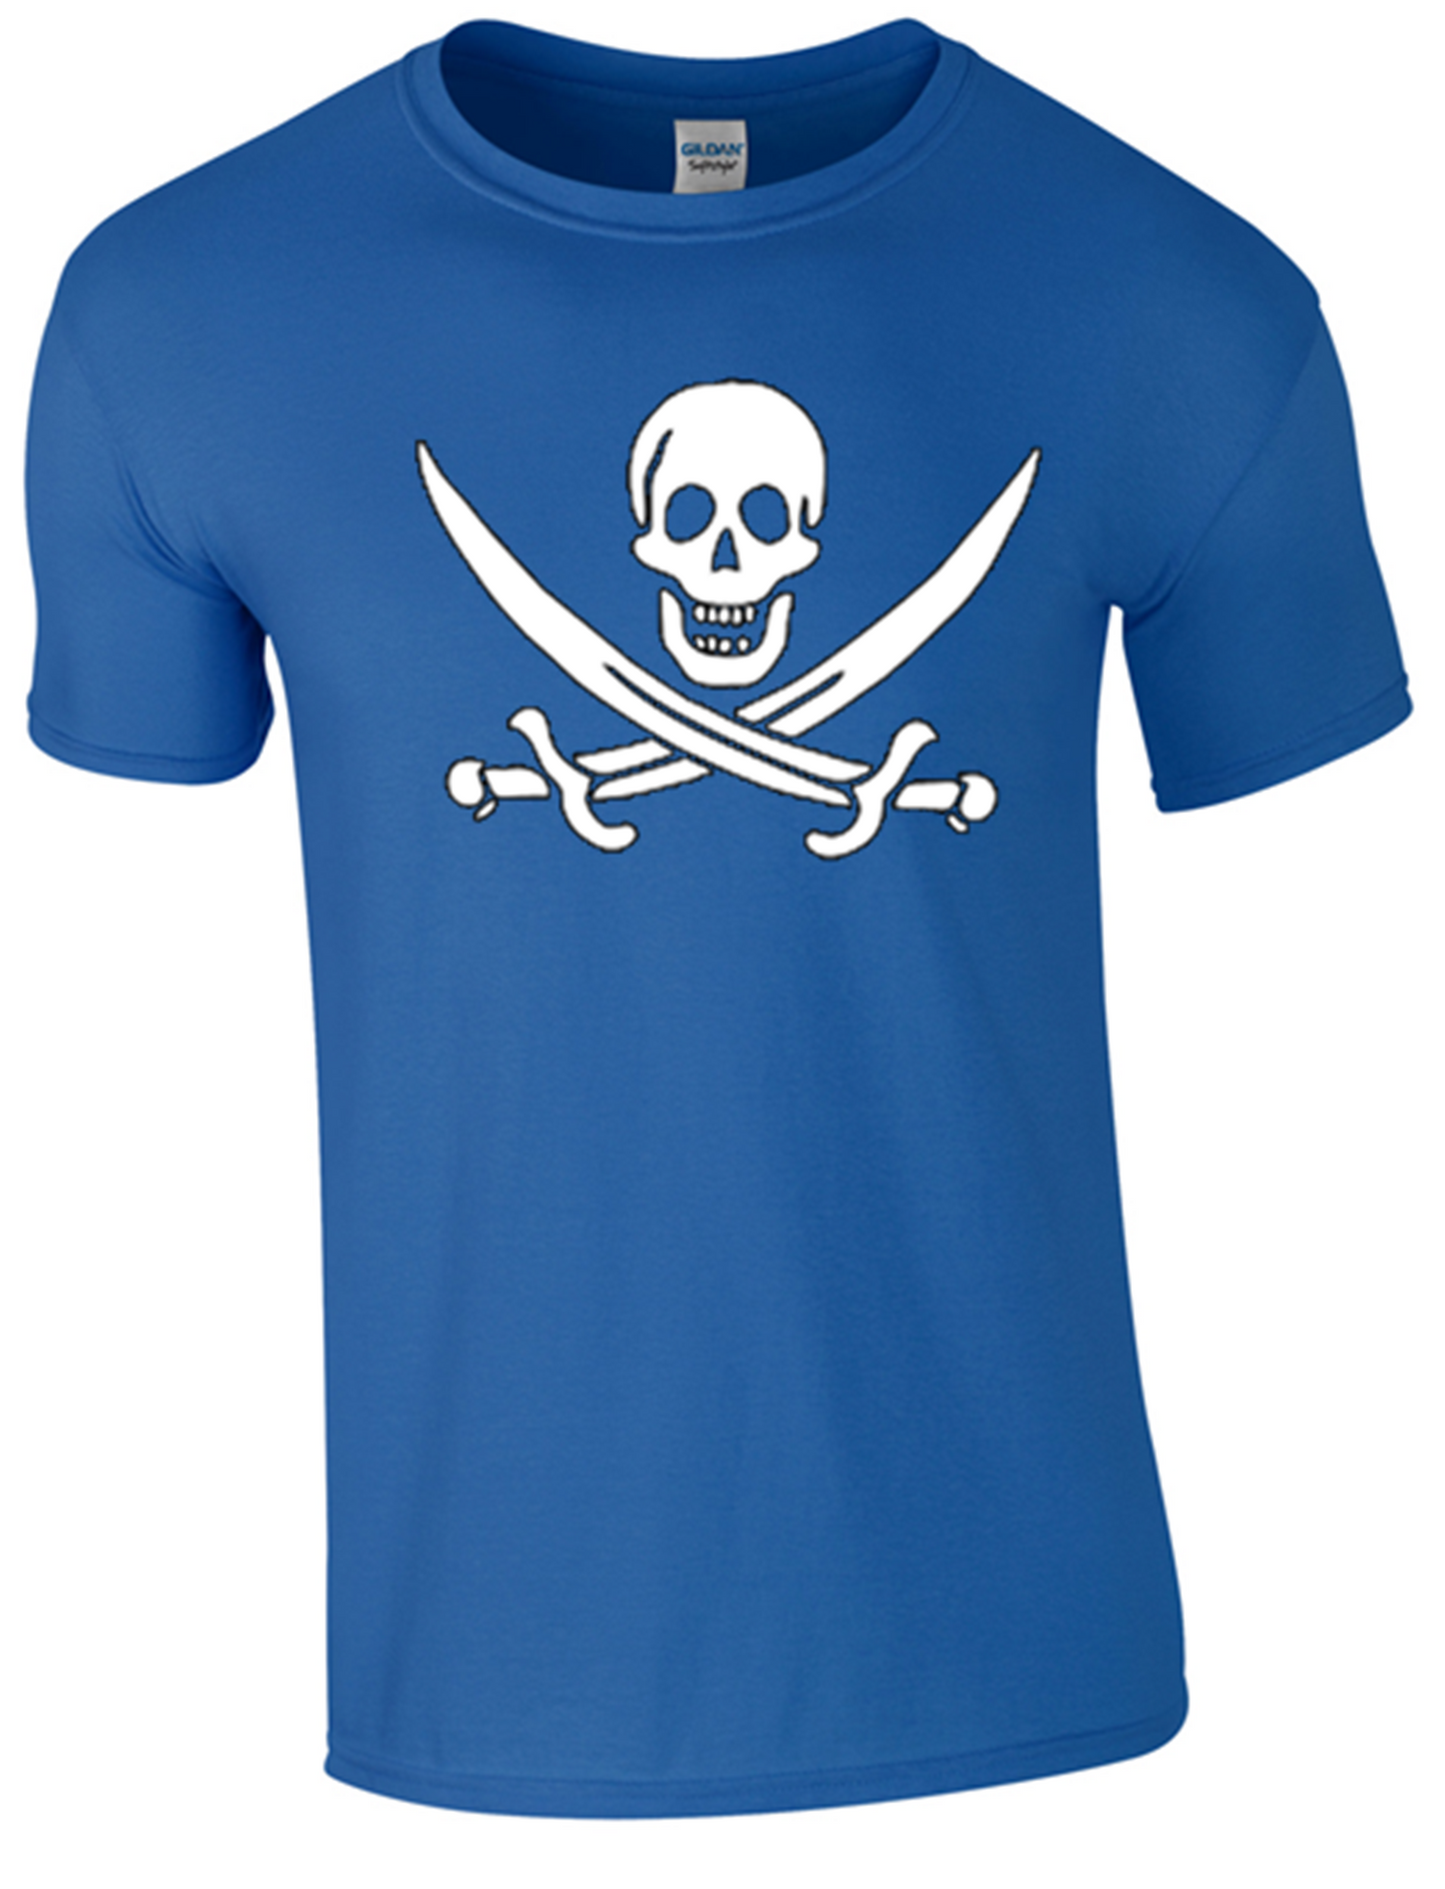 Pirate T-Shirt Printed DTG (Direct to Garment) for a Permanent Finish. - Army 1157 kit S / Royal Blue Army 1157 Kit Veterans Owned Business